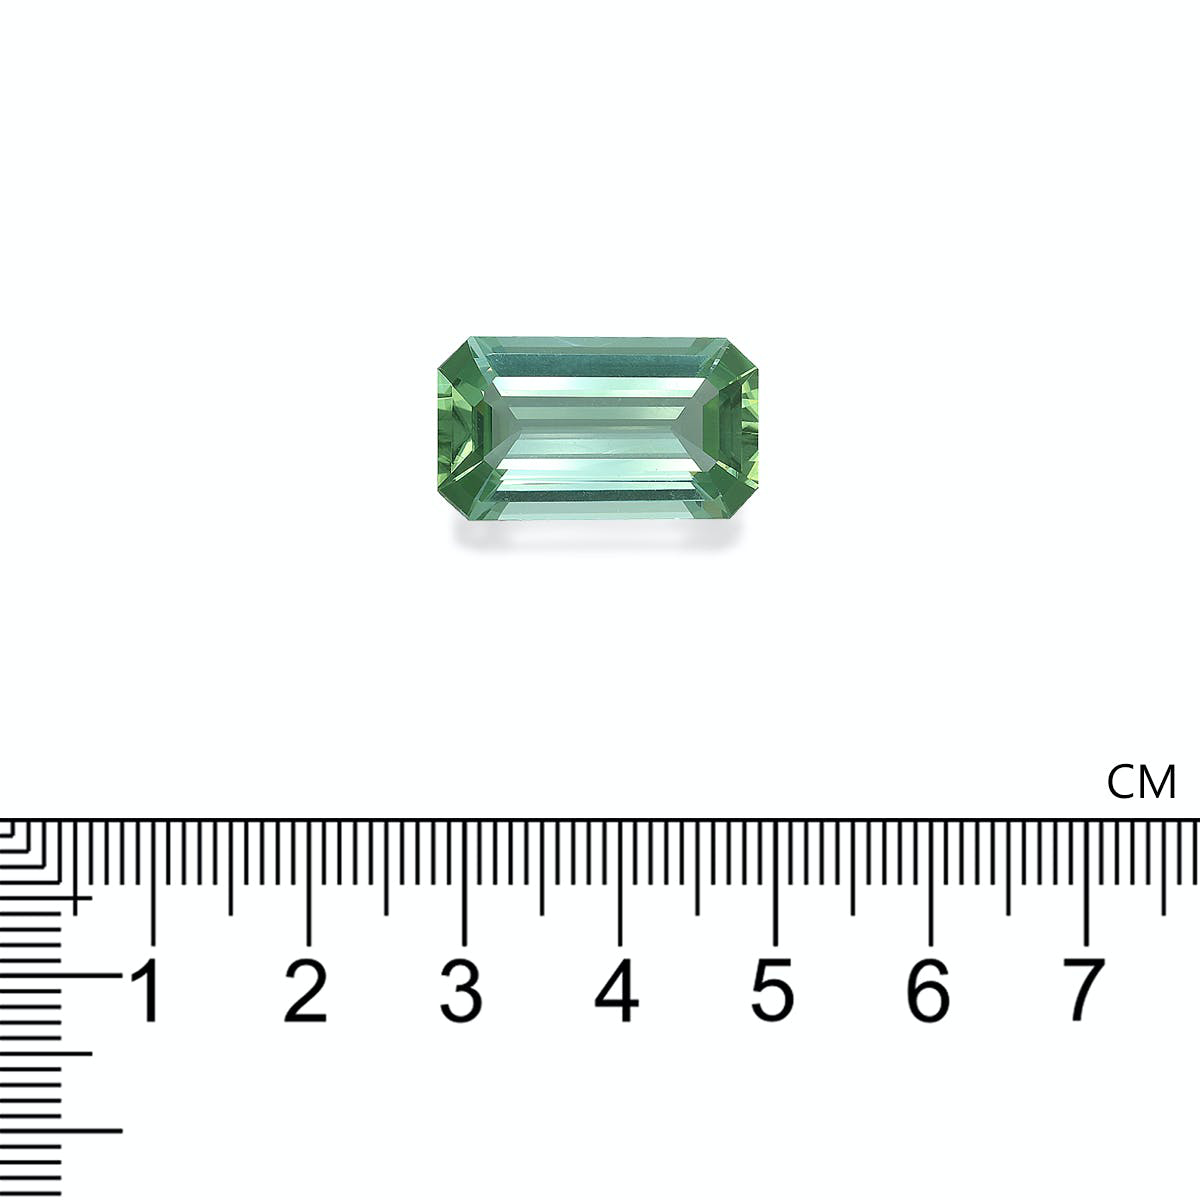 Picture of Mist Green Tourmaline 15.25ct (TG1489)